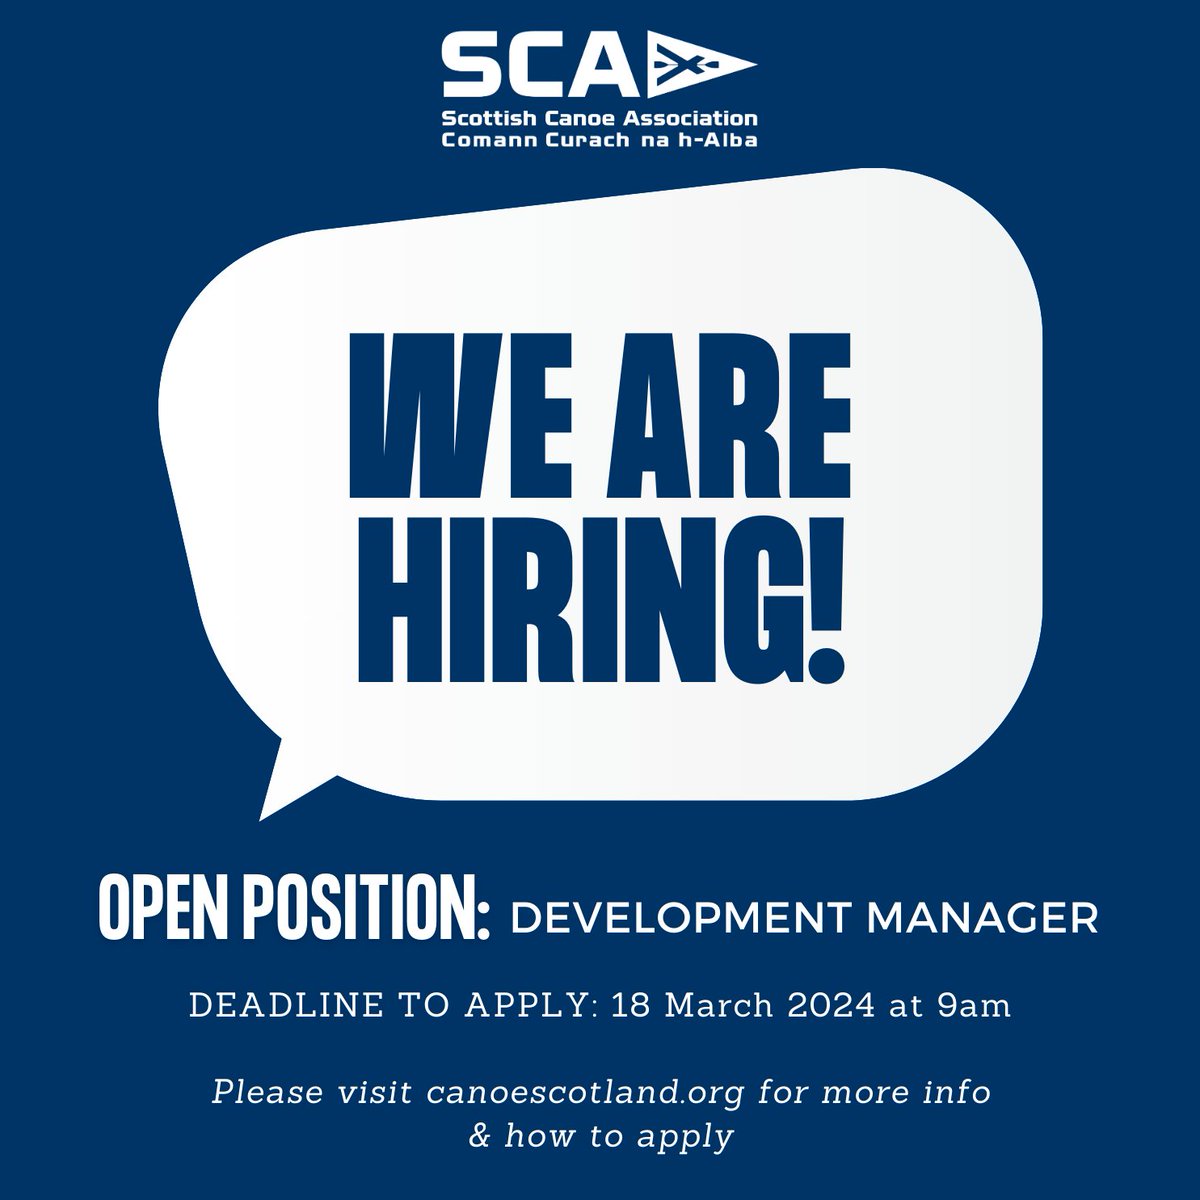 VACANCY: SCA DEVELOPMENT MANAGER We are seeking a passionate & experienced Development Manager to join our dynamic team. You will play a central role in driving forward a portfolio of exciting paddlesport development projects and initiatives. Read more: canoescotland.org/vacancy-sca-de…